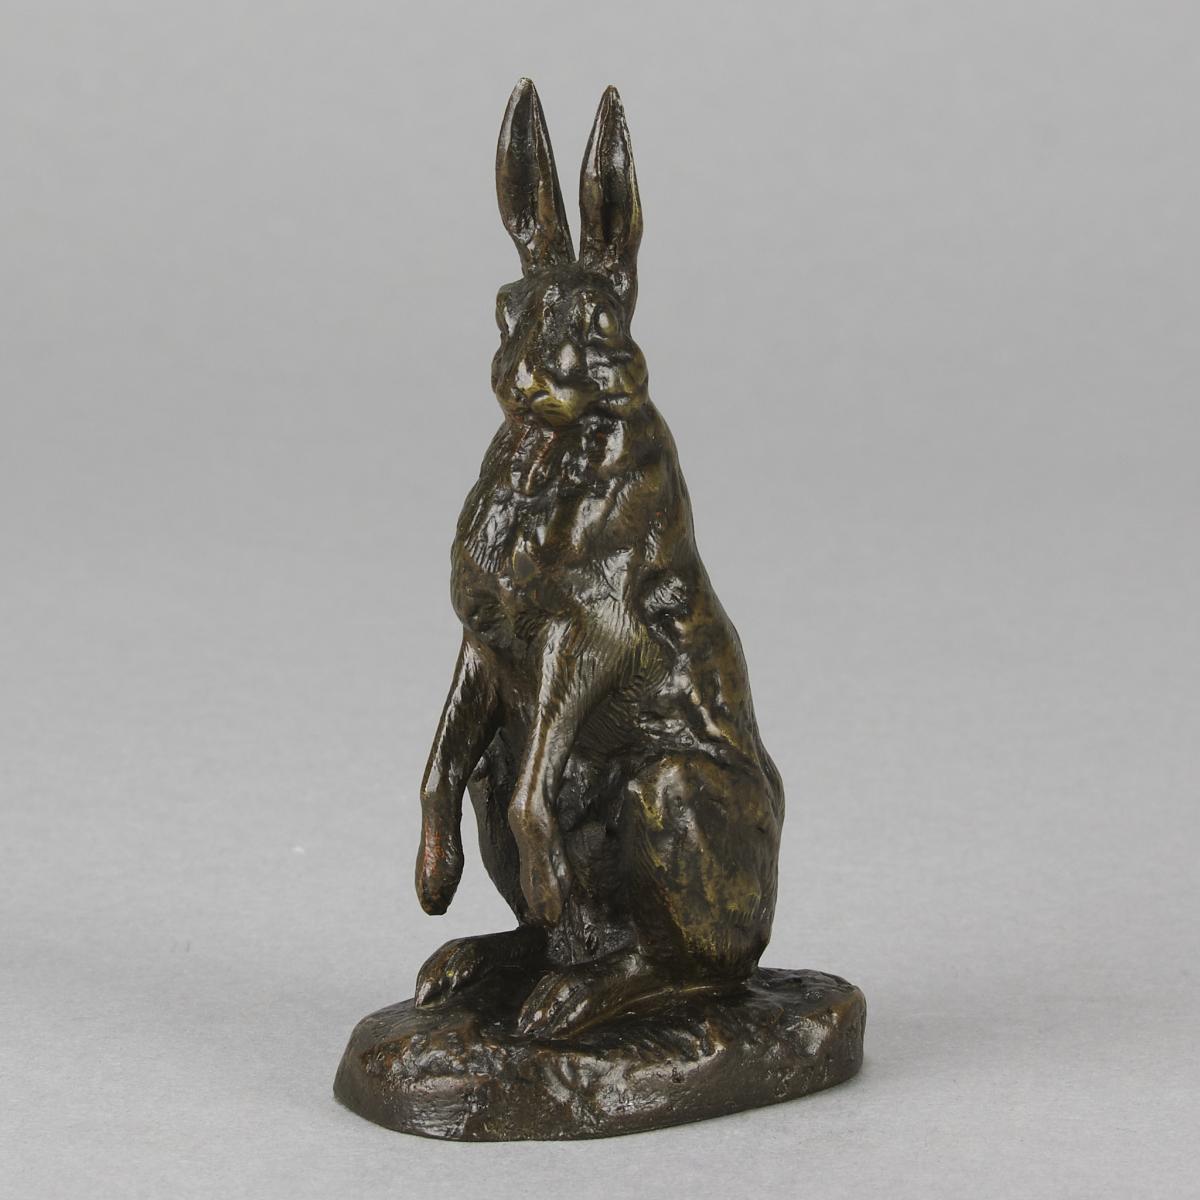 Late 19th Century Animalier Sculpture entitled "Alert Hare" by Alfred Dubucand